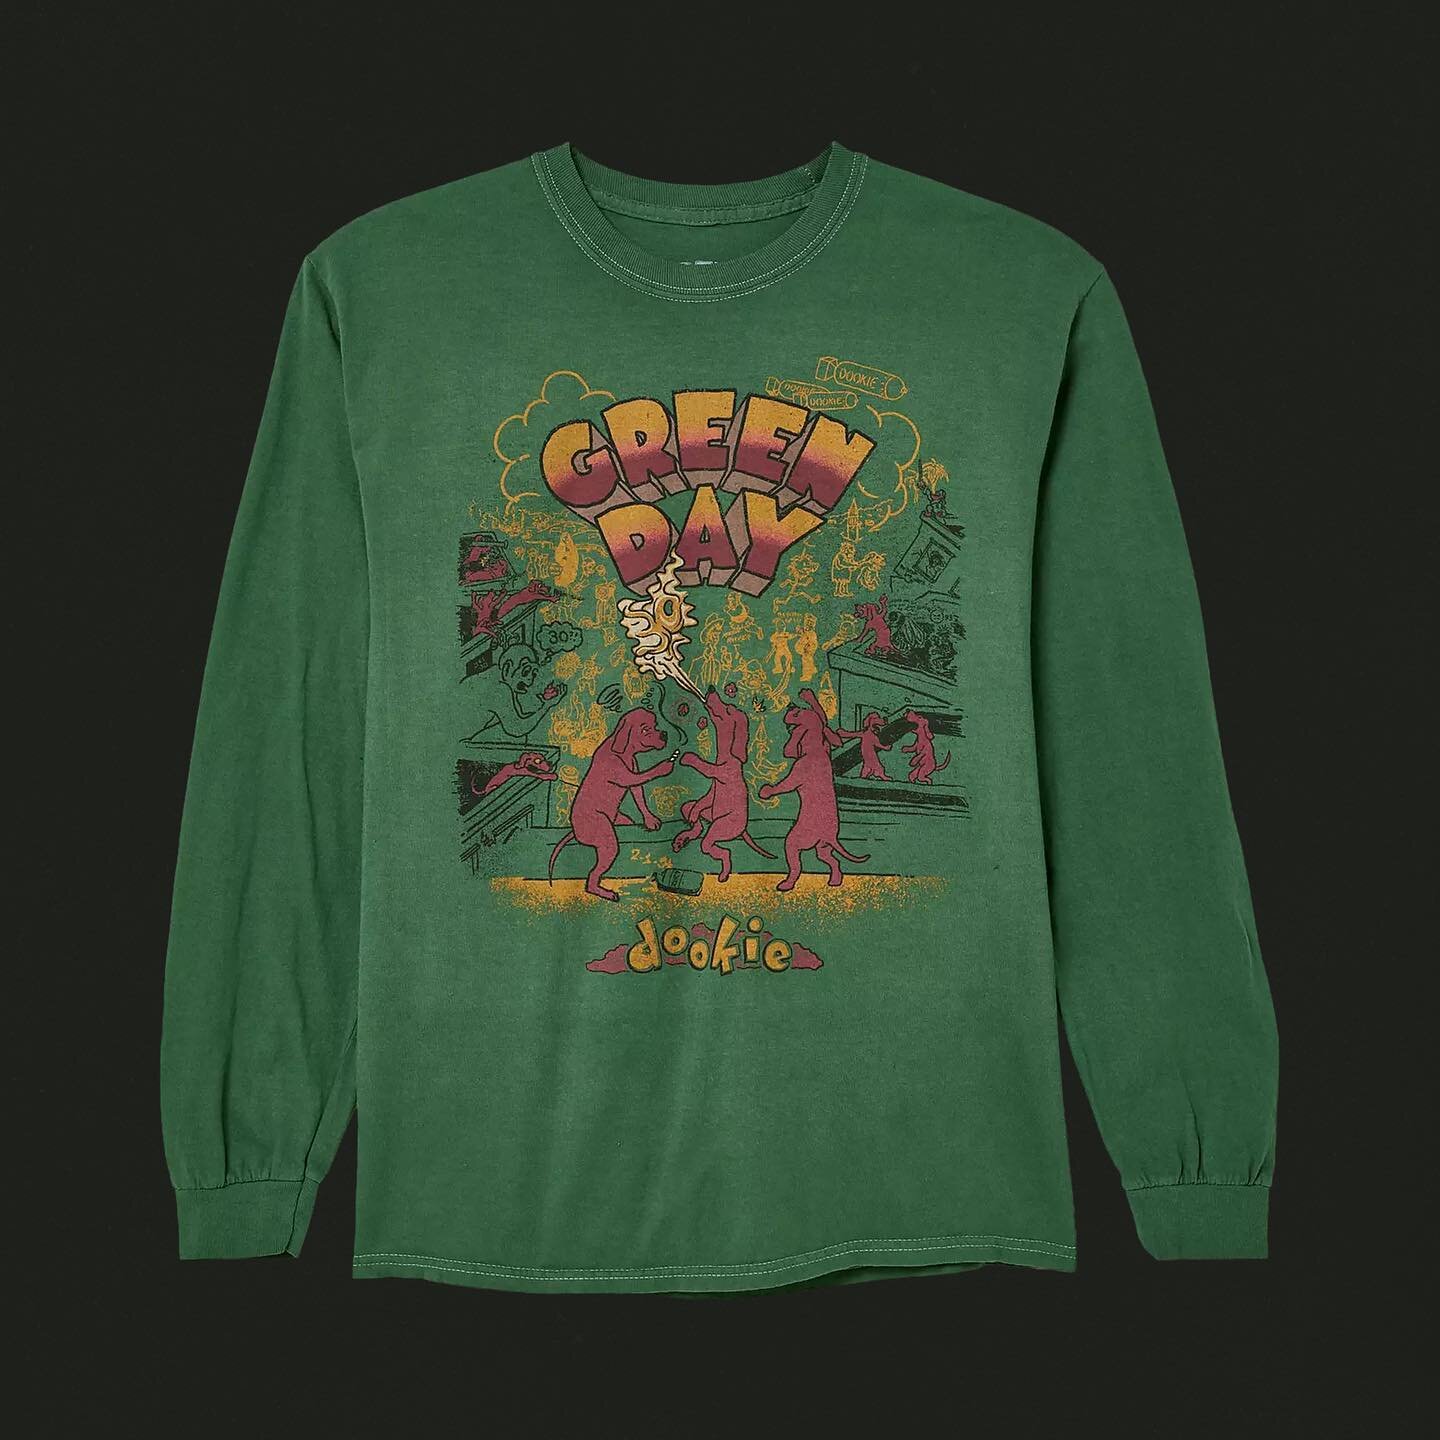 An unexpected discovery! My Dookie design is also for sale at Urban Outfitters in this killer colorway! A first for me, from what I know of, so I had to make a post about it. From silly little doodles to store shelves, the journey continues to blow m